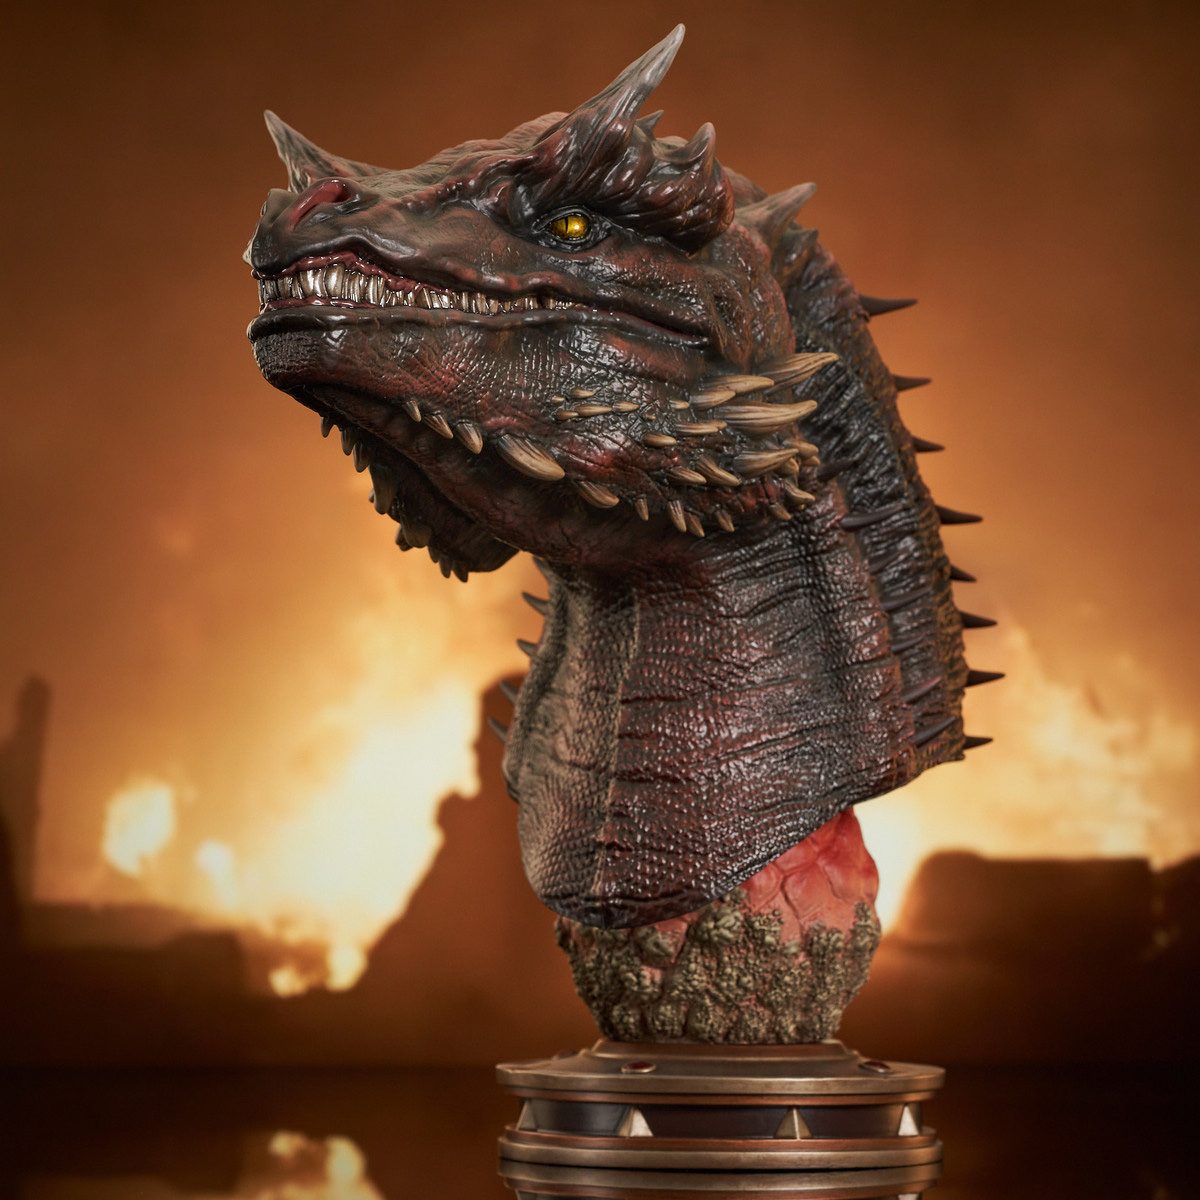 Bust Caraxes Legends in 3D, the Dragon of Daemon Targaryen in House of the Dragon